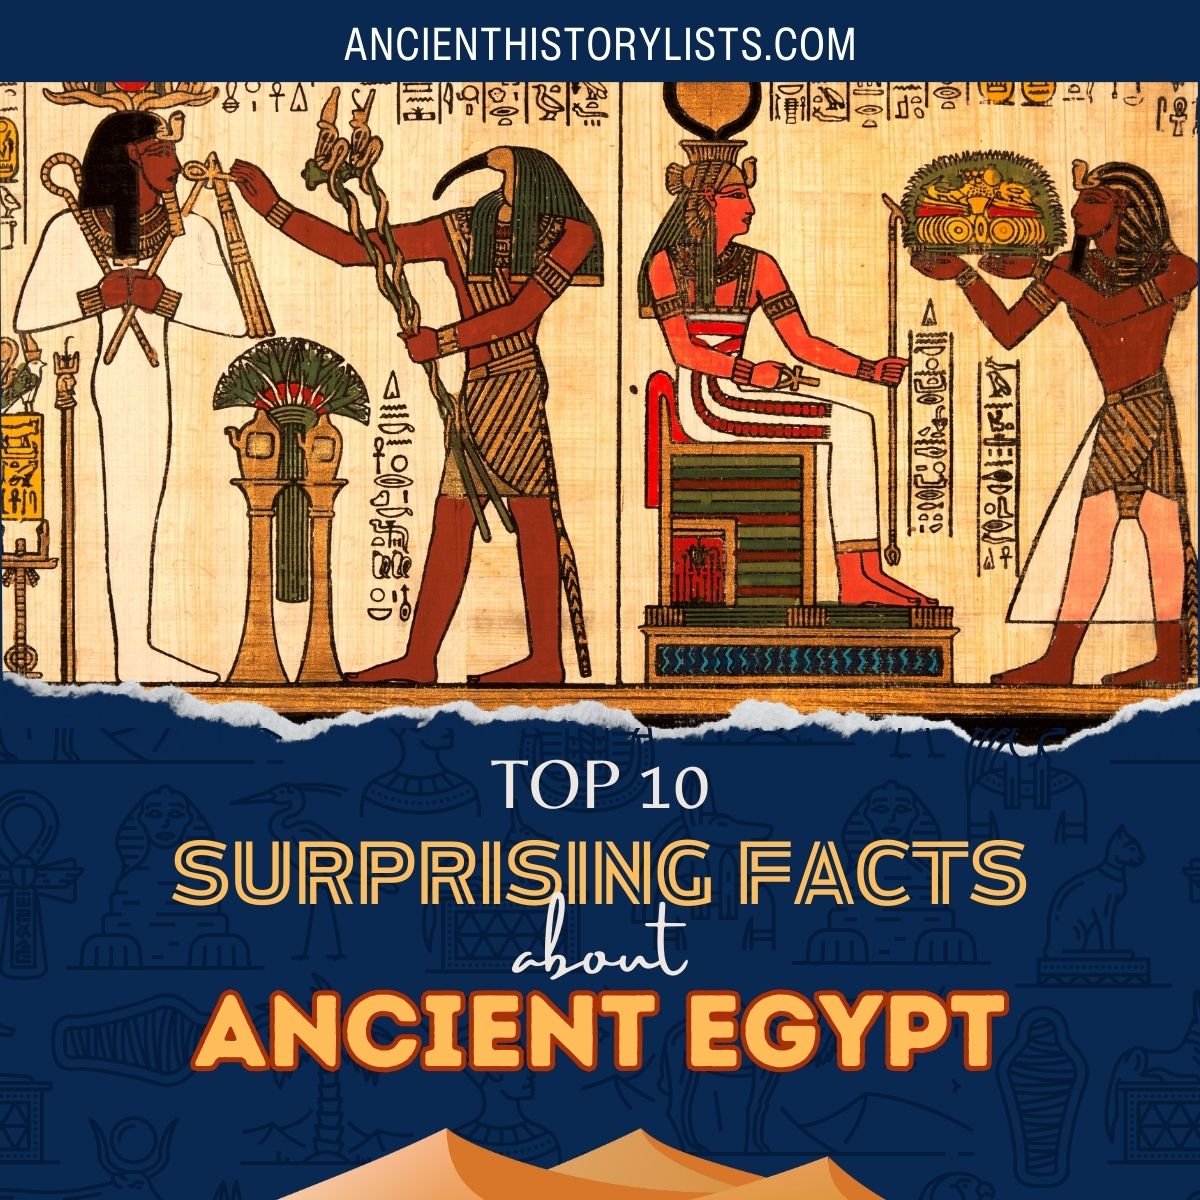 Facts about Ancient Egypt